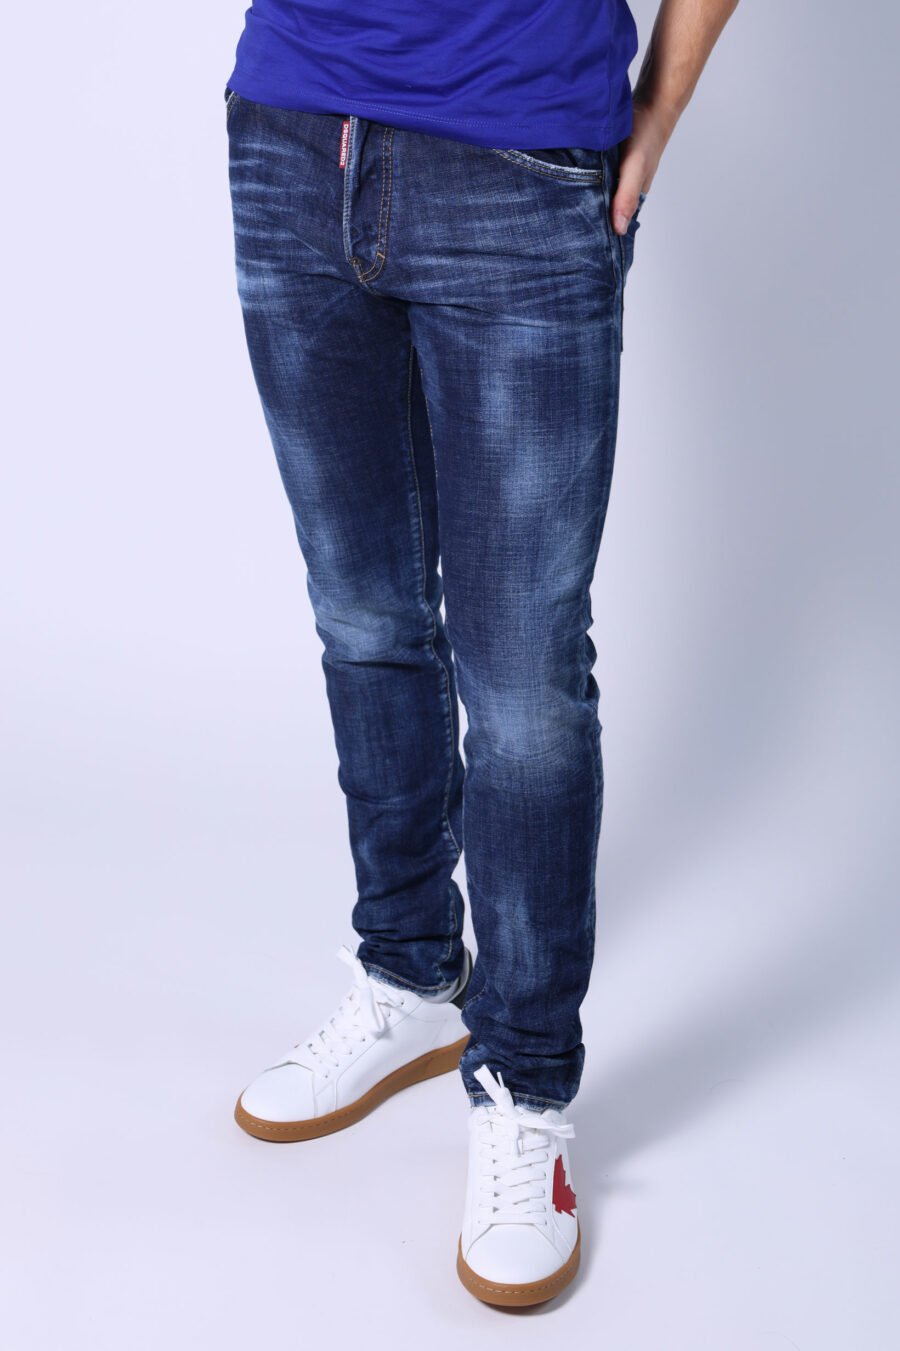 Jeans "cool guy jean" blue worn out - Untitled Catalog 05403